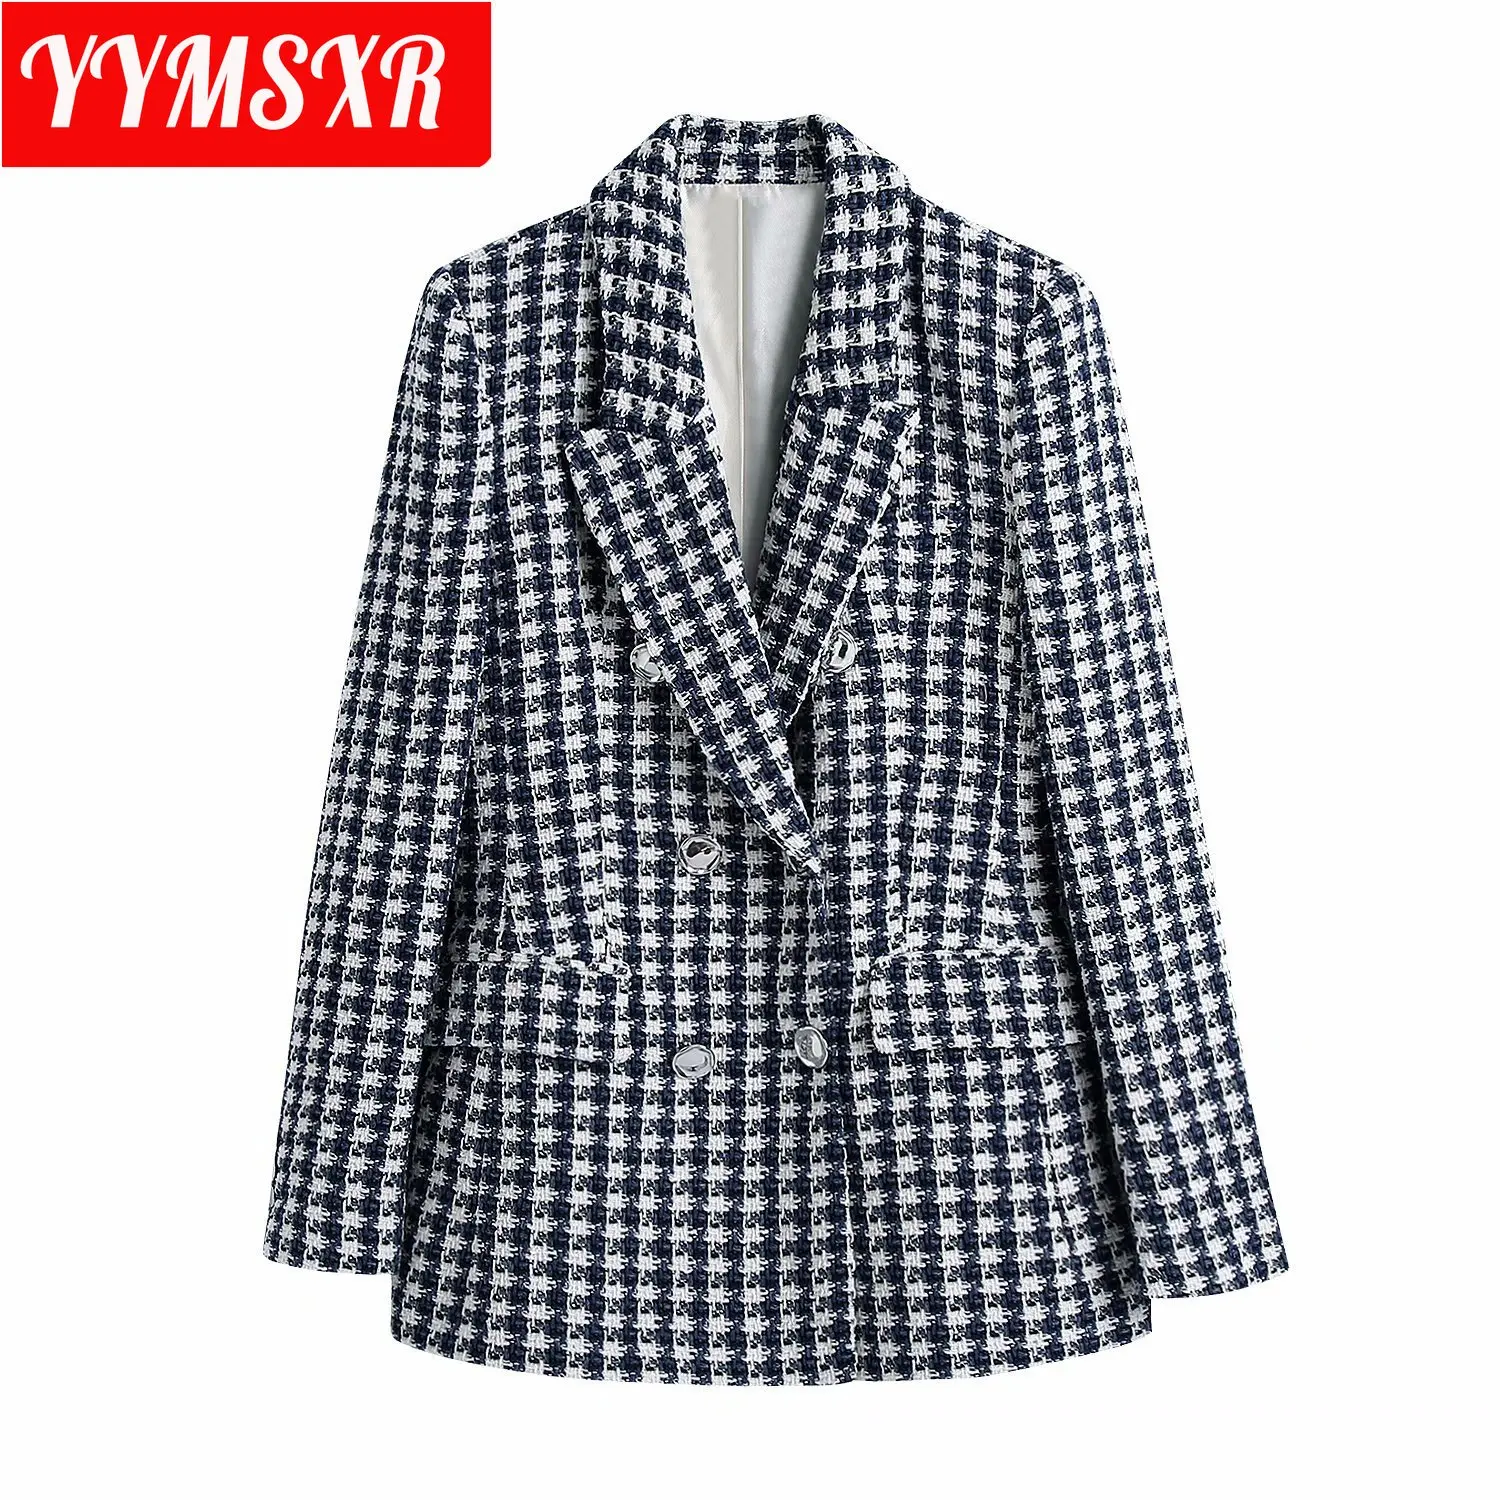 Autumn and Winter New Fashion Small Fragrance Style Han Fan Temperament Texture Slim Suit Jacket Women All-match Casual